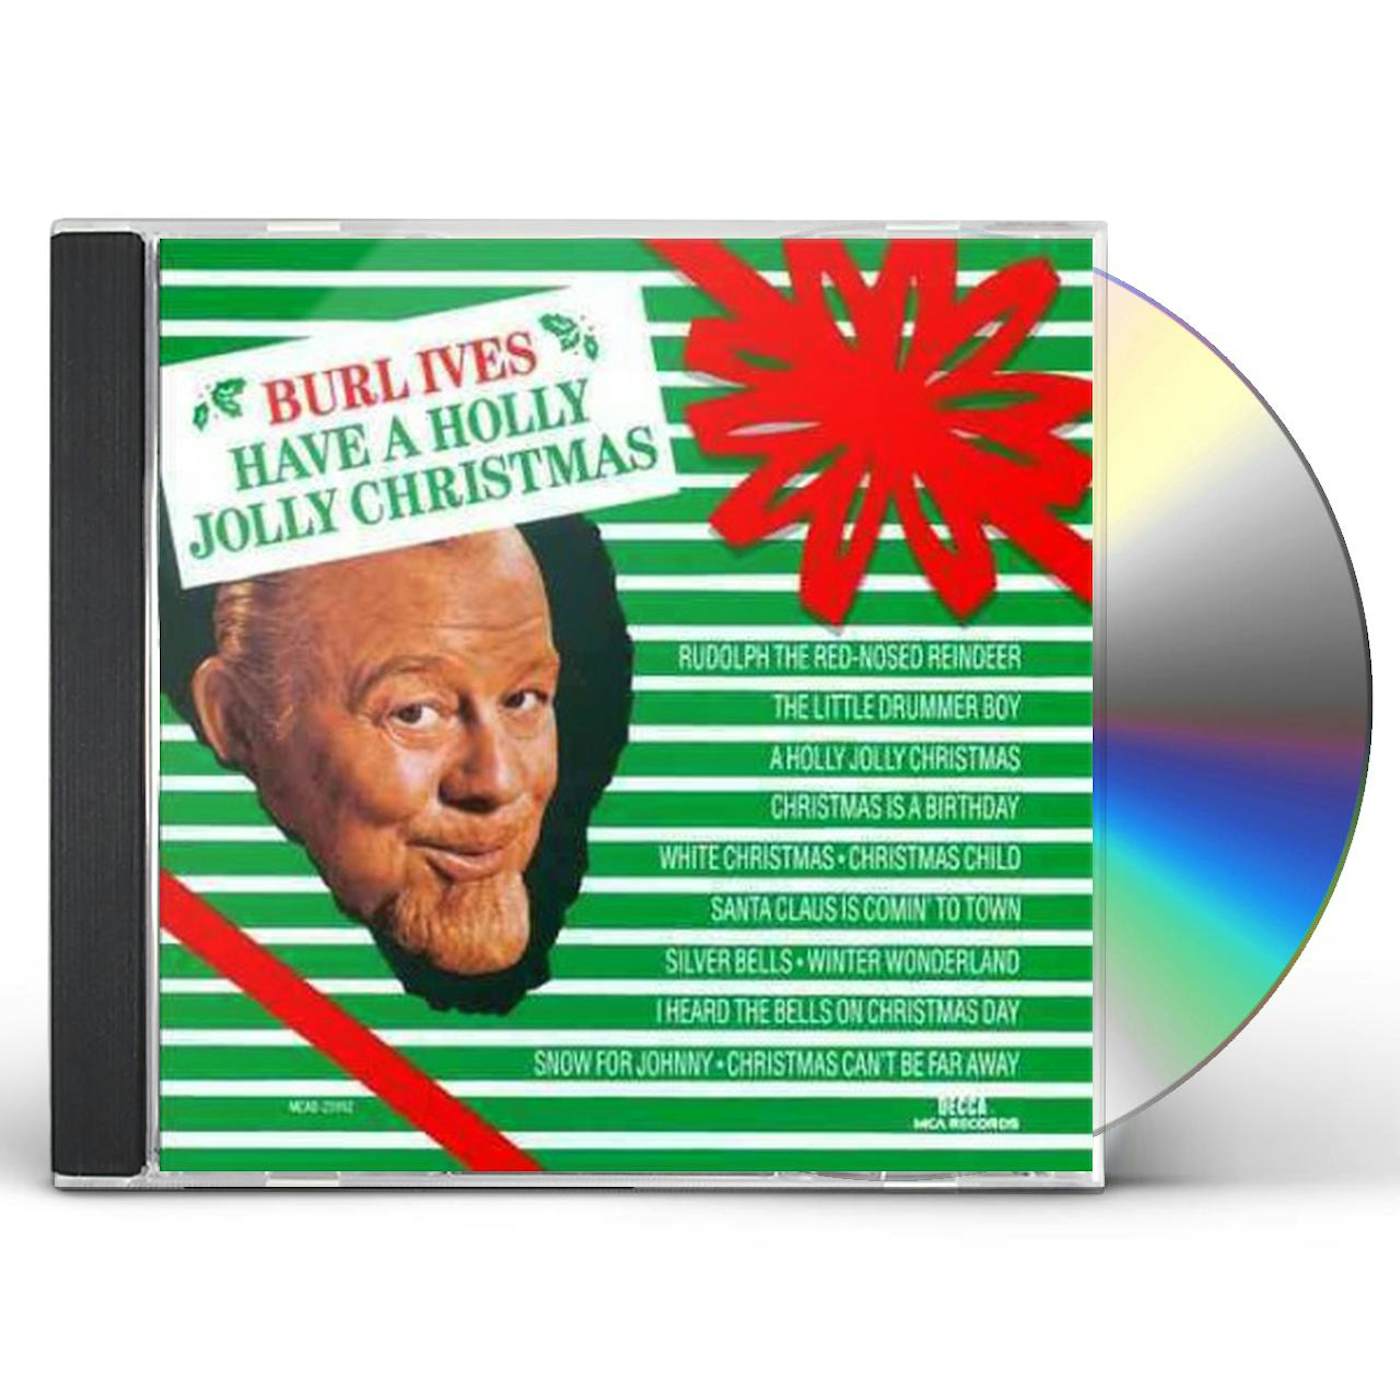 Burl Ives HAVE A HOLLY JOLLY CHRISTMAS CD